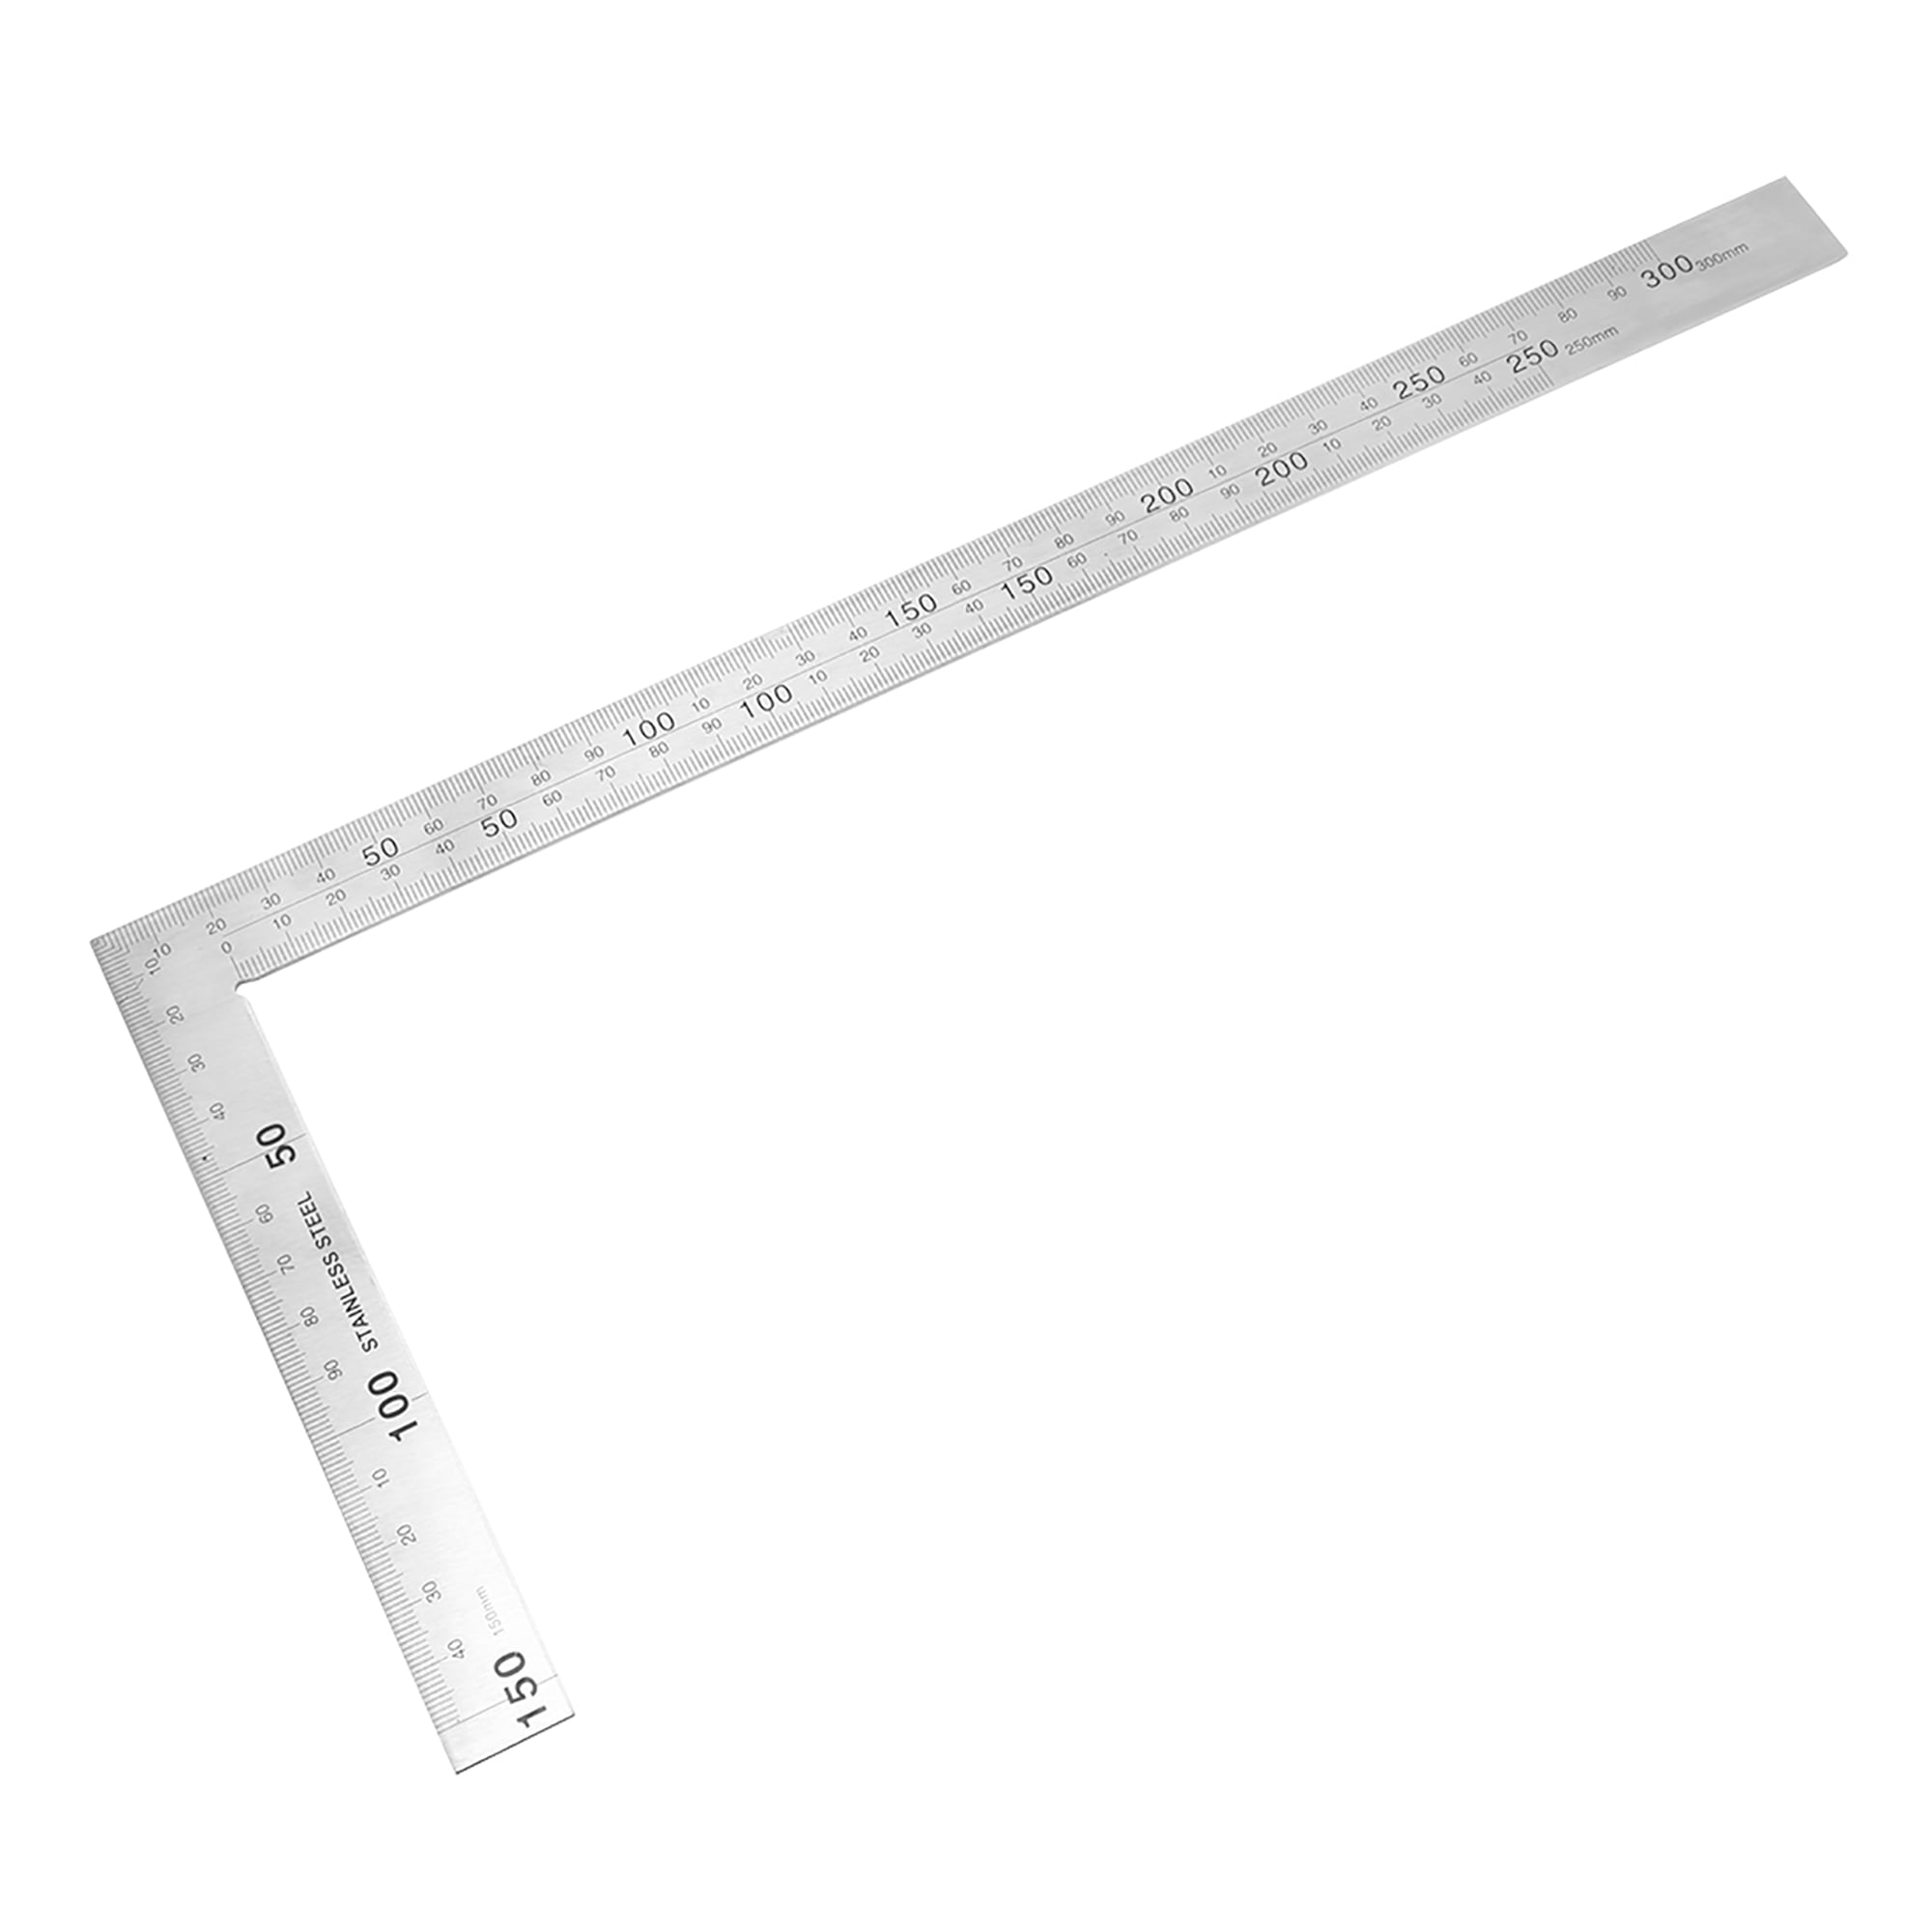 Carpenter 90° Metal Right Angle Accurate Square Construction Ruler 0-300mm/500mm 